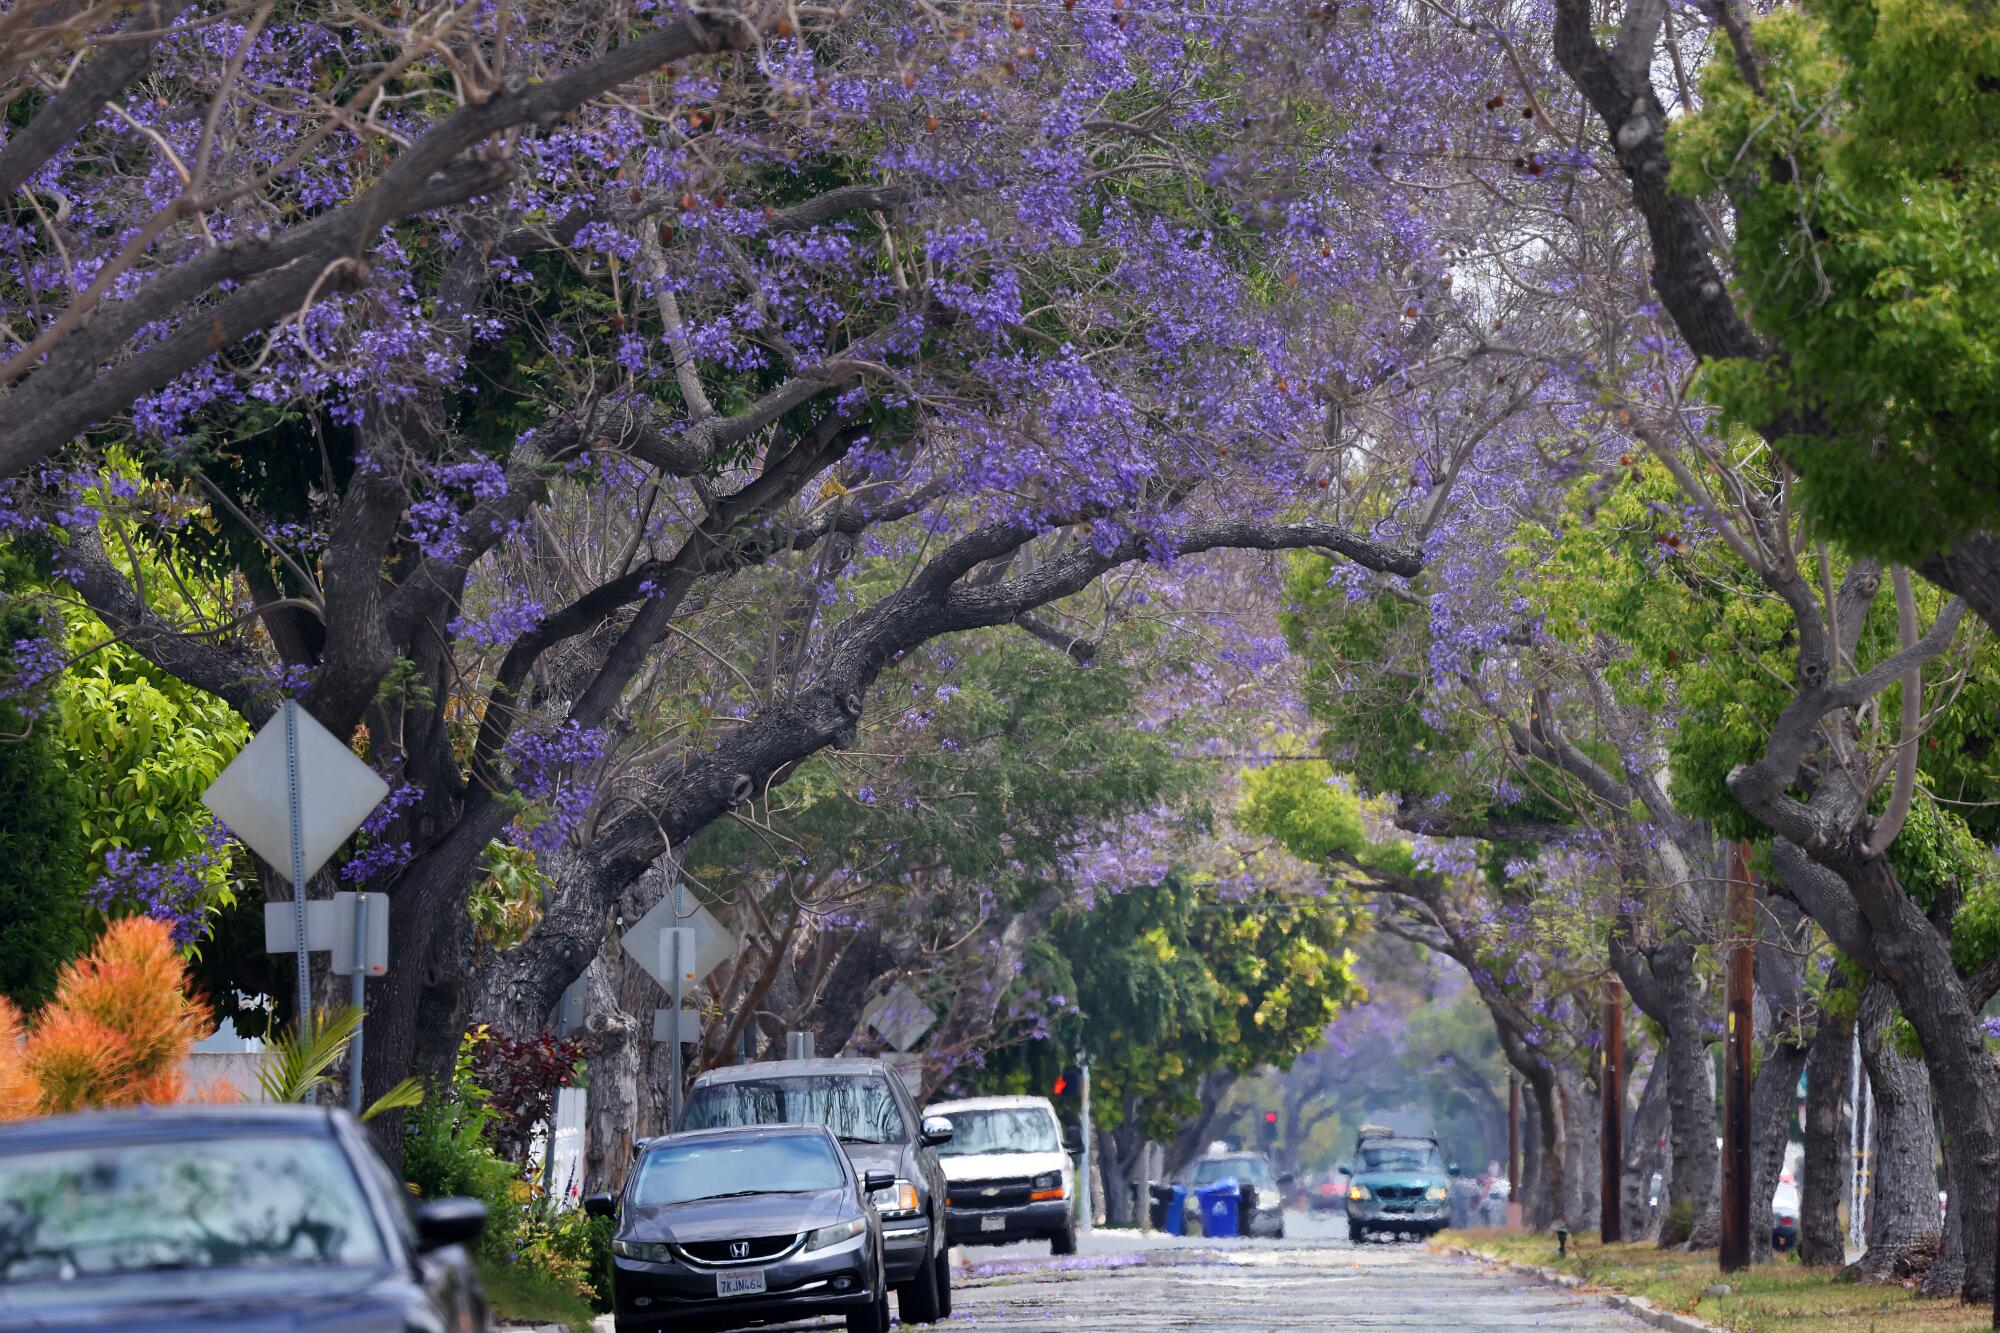 Purple leafed jacarandas in bloom on a street with cars